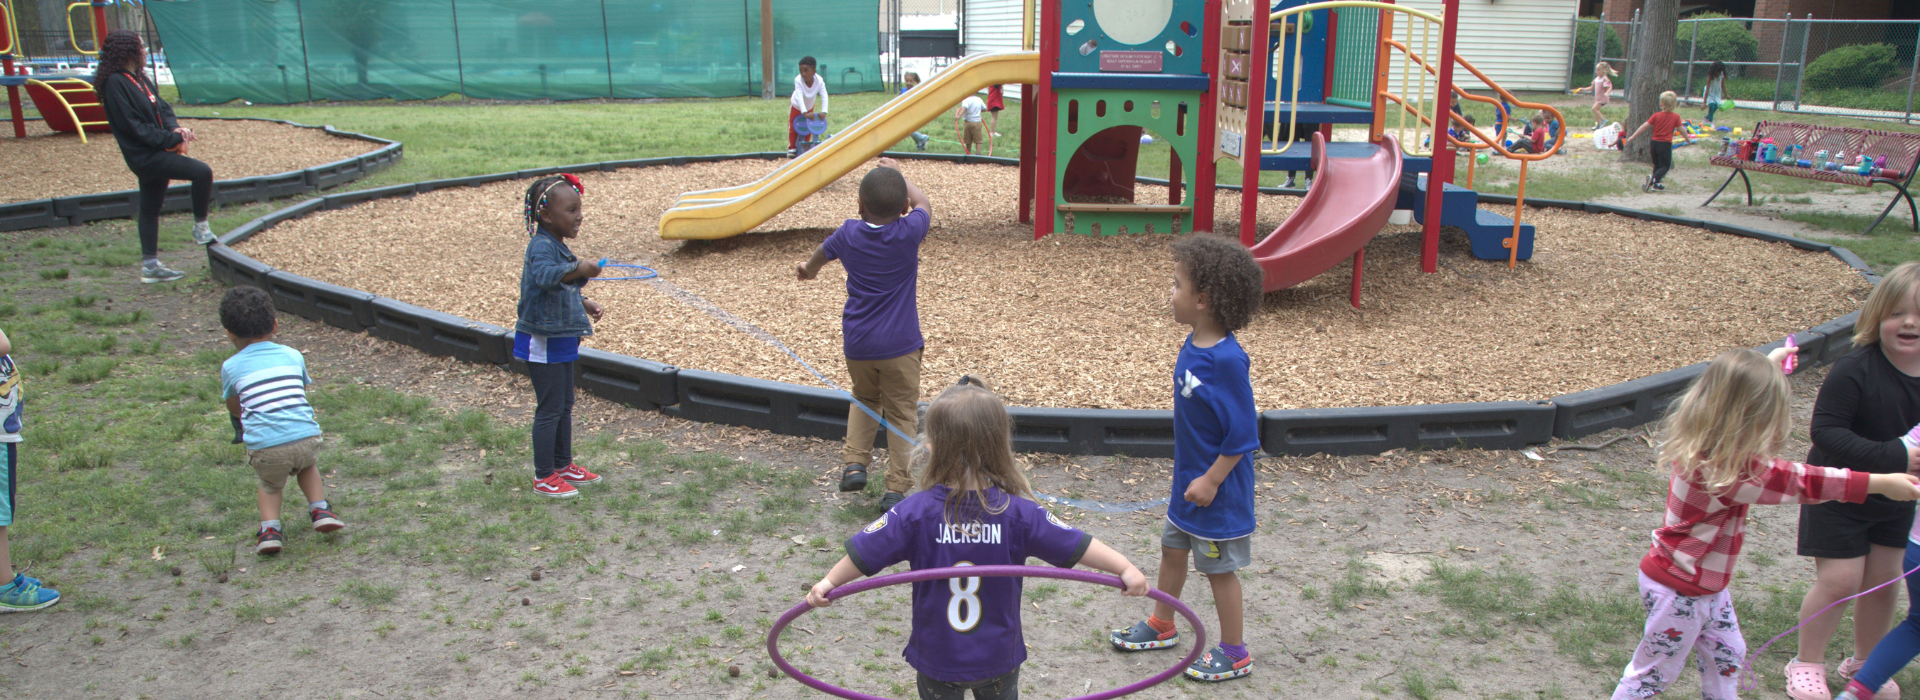 Kids playing on a playground at the Mt. Trashmore Family YMCA preschool